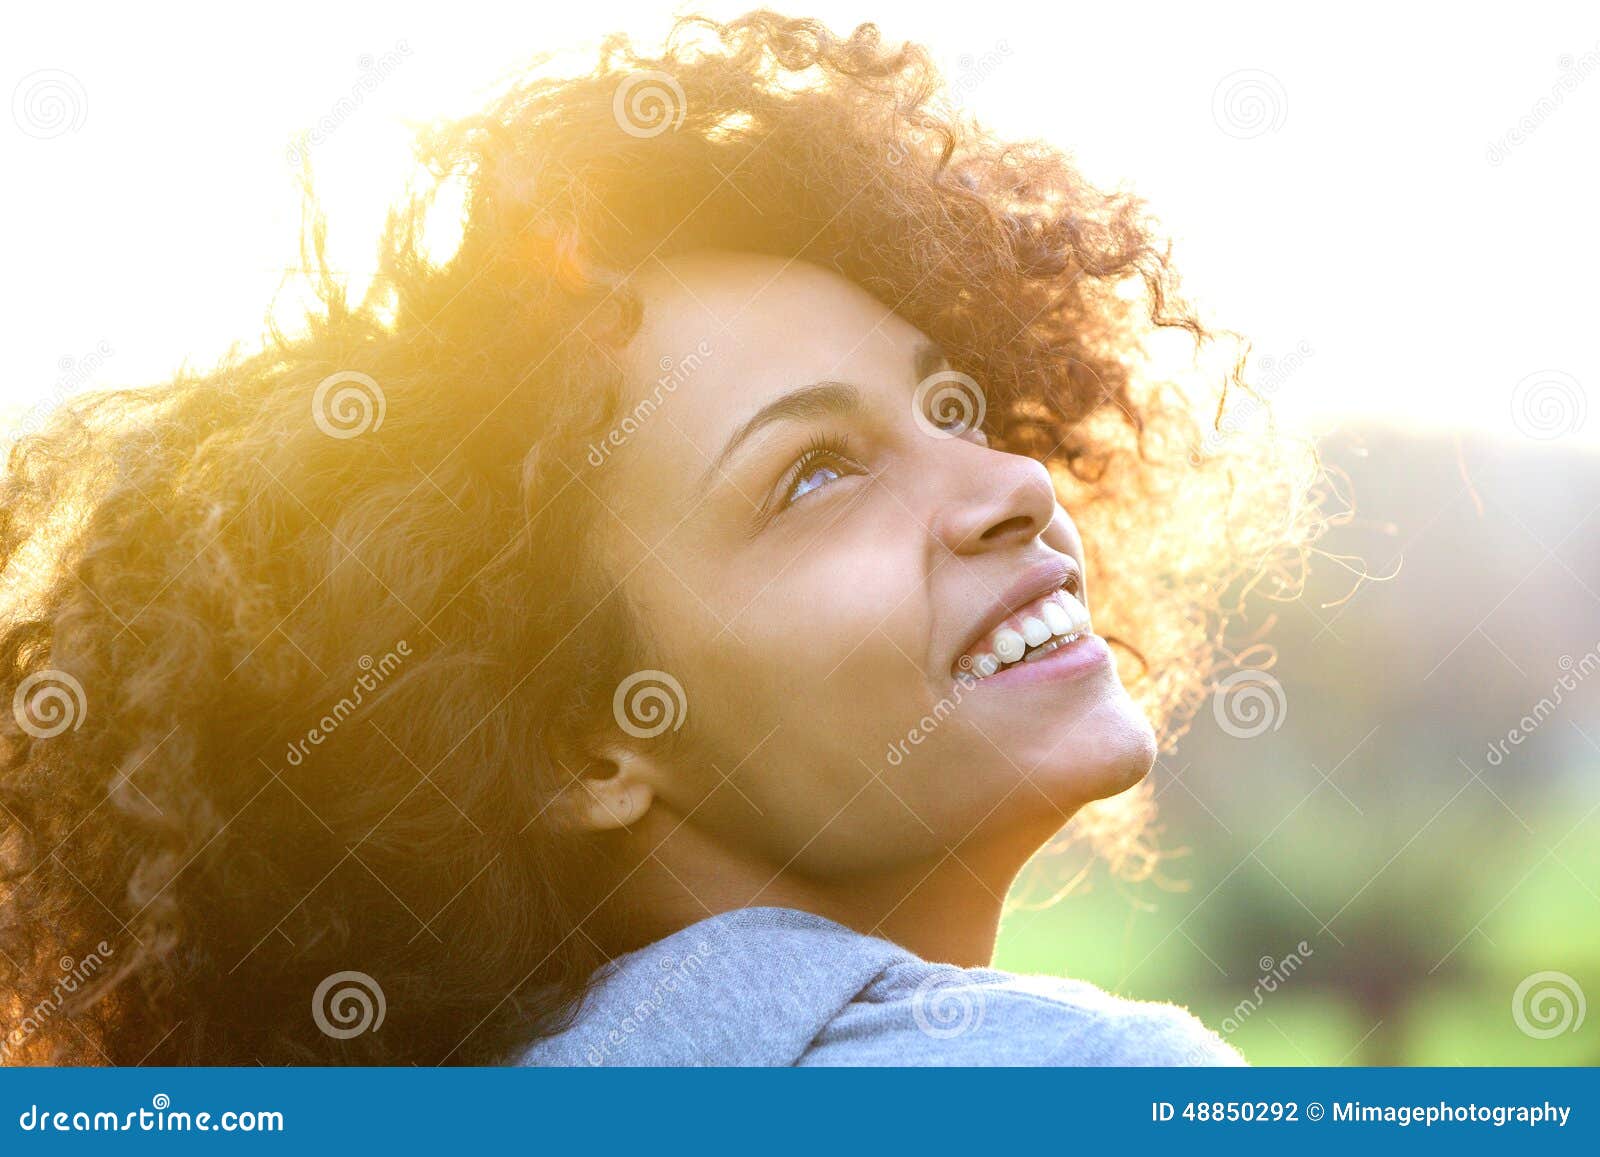 young african american woman smiling and looking up